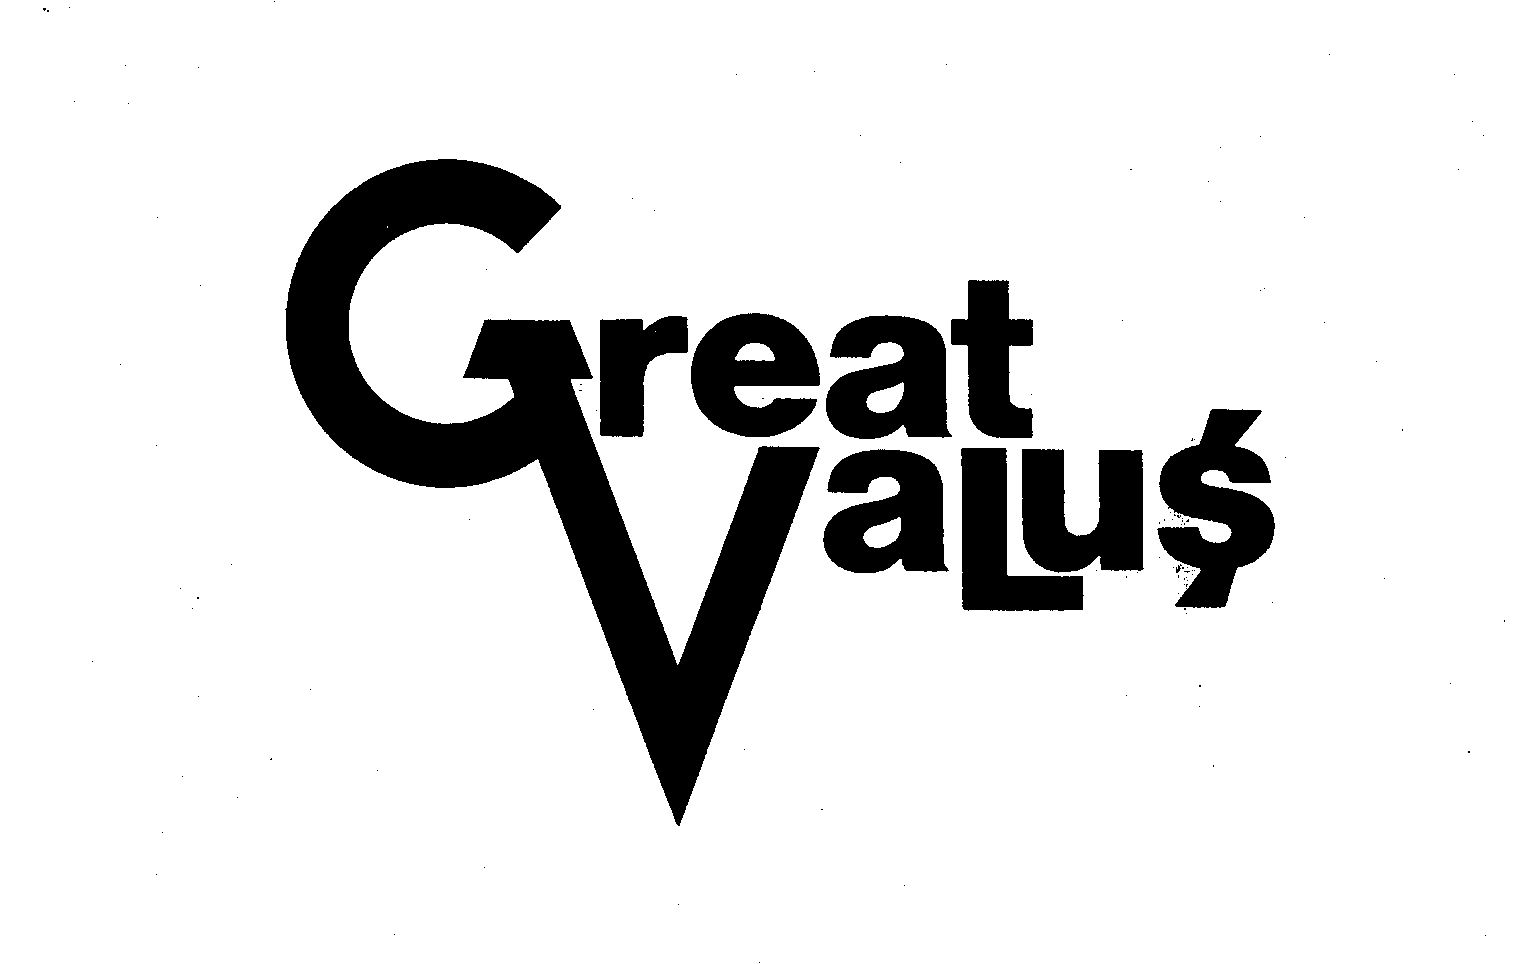  GREAT VALUS